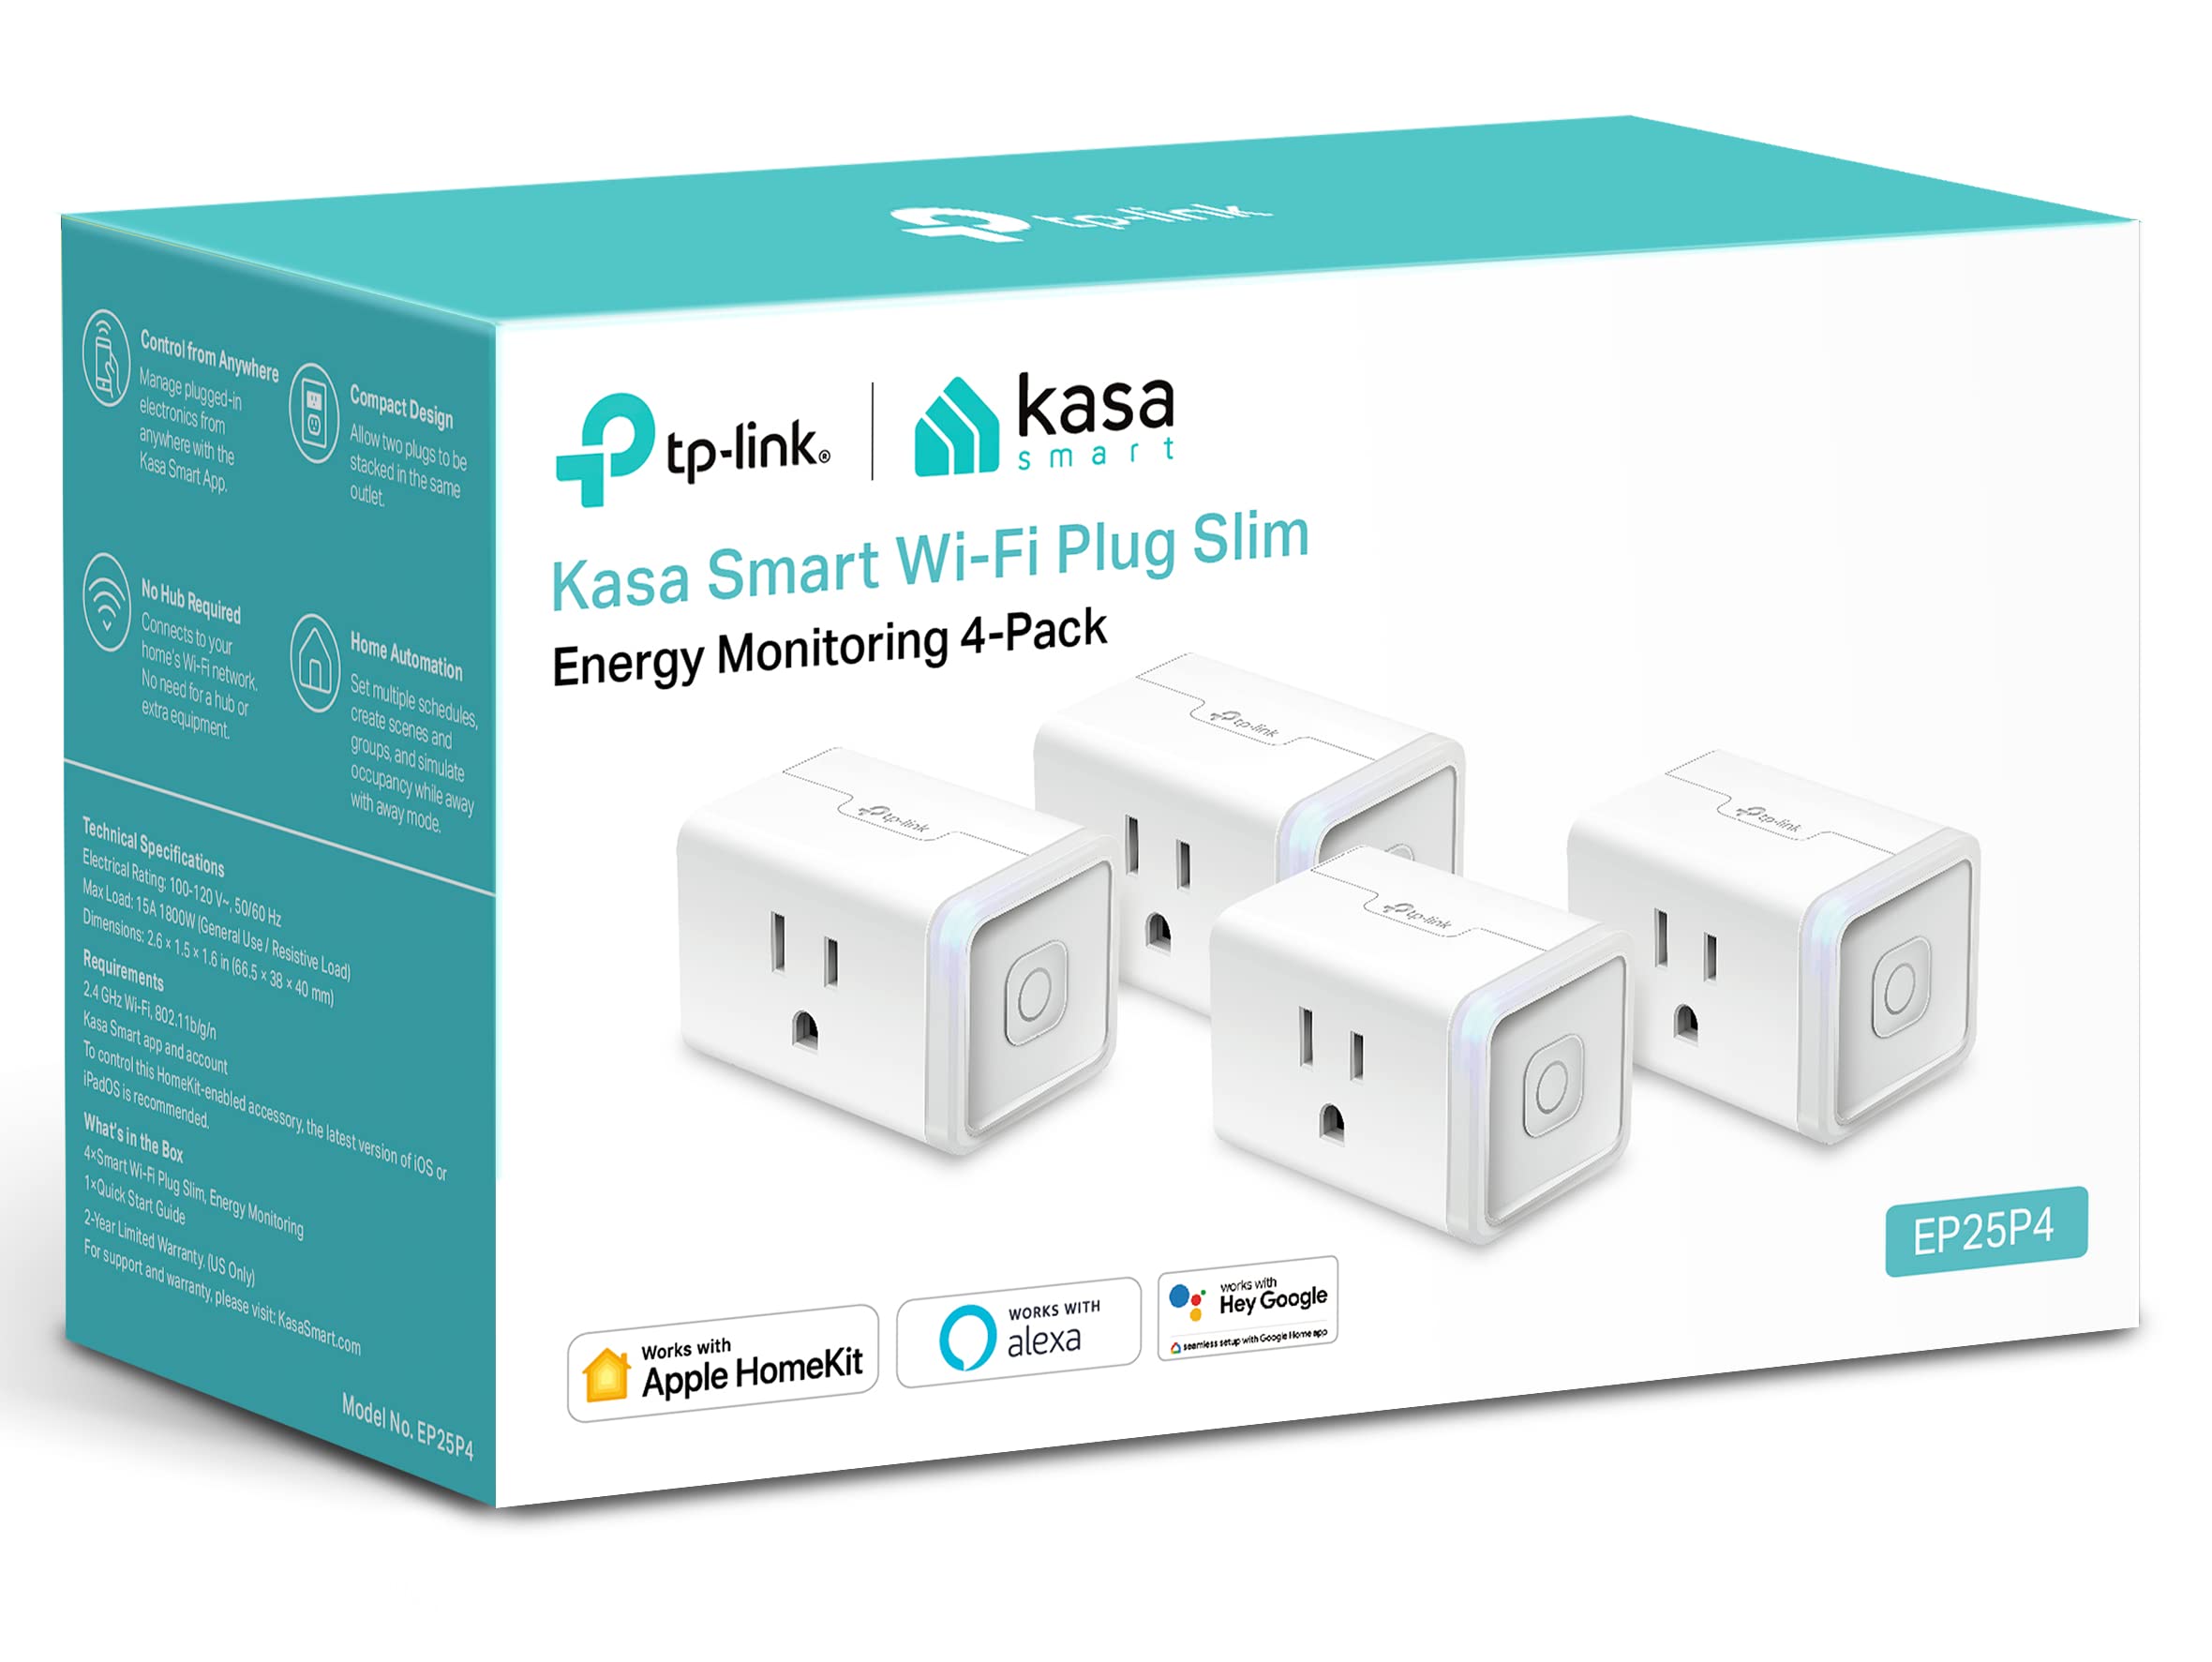 Kasa Smart Plug Mini 15A, Apple HomeKit Supported, Smart Outlet Works with Siri, Alexa & Google Home, 4-Pack (EP25P4) for $34.99